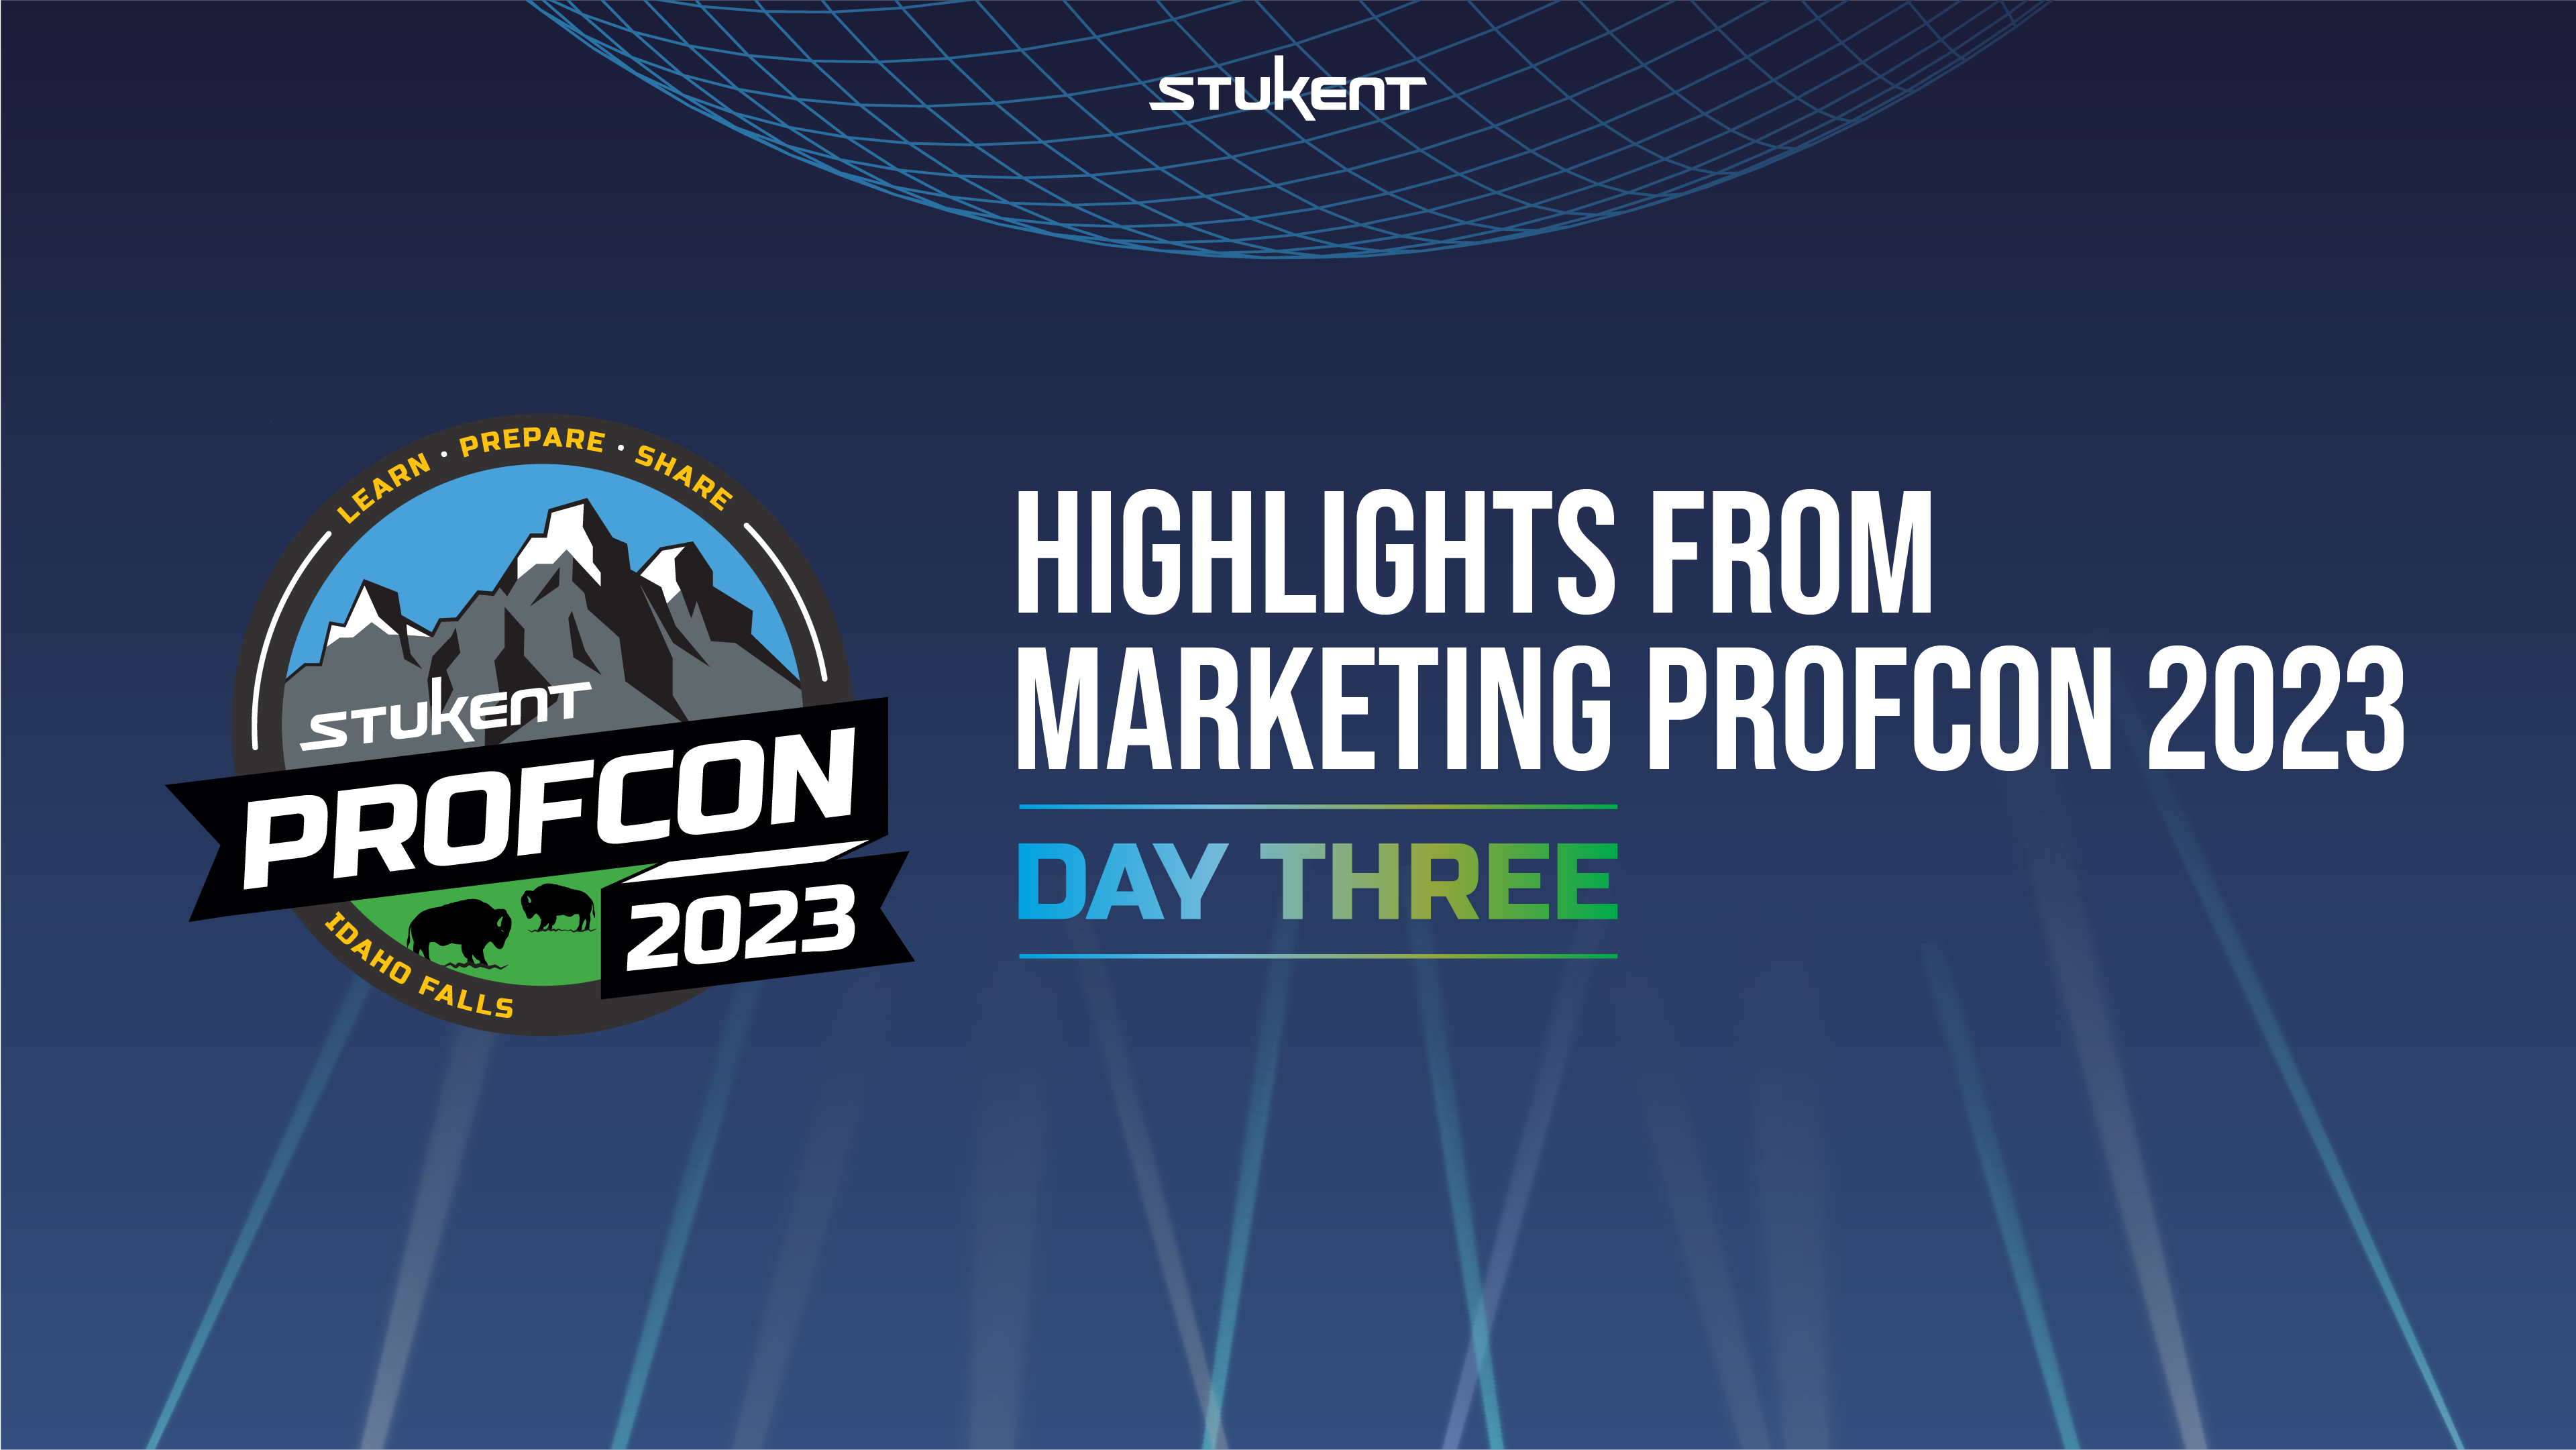 Day Three of ProfCon Highlights